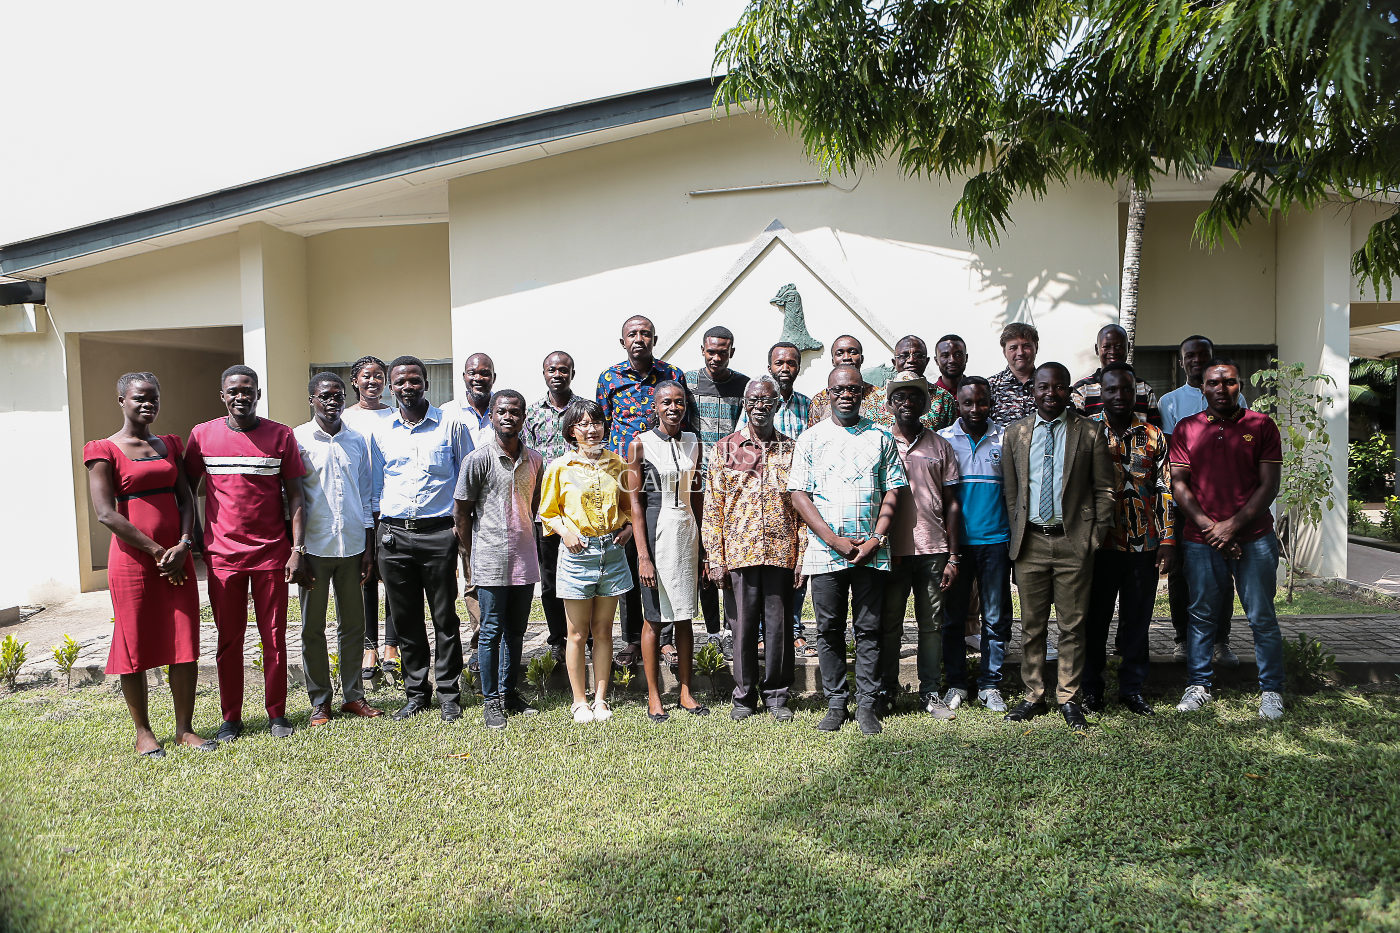 A group photo of participants after the meeting